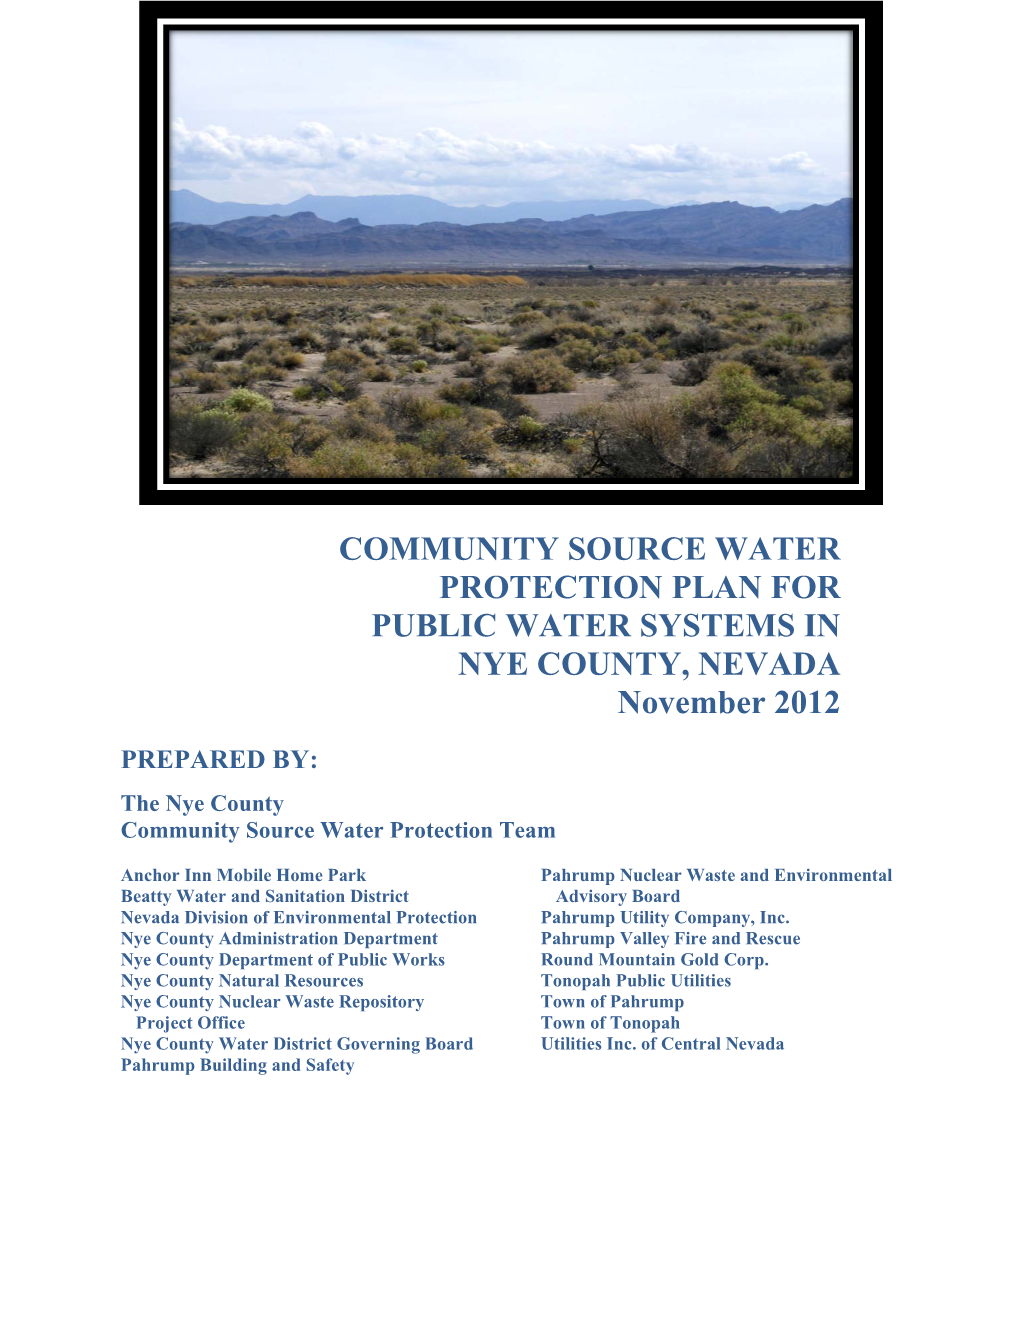 COMMUNITY SOURCE WATER PROTECTION PLAN for PUBLIC WATER SYSTEMS in NYE COUNTY, NEVADA November 2012